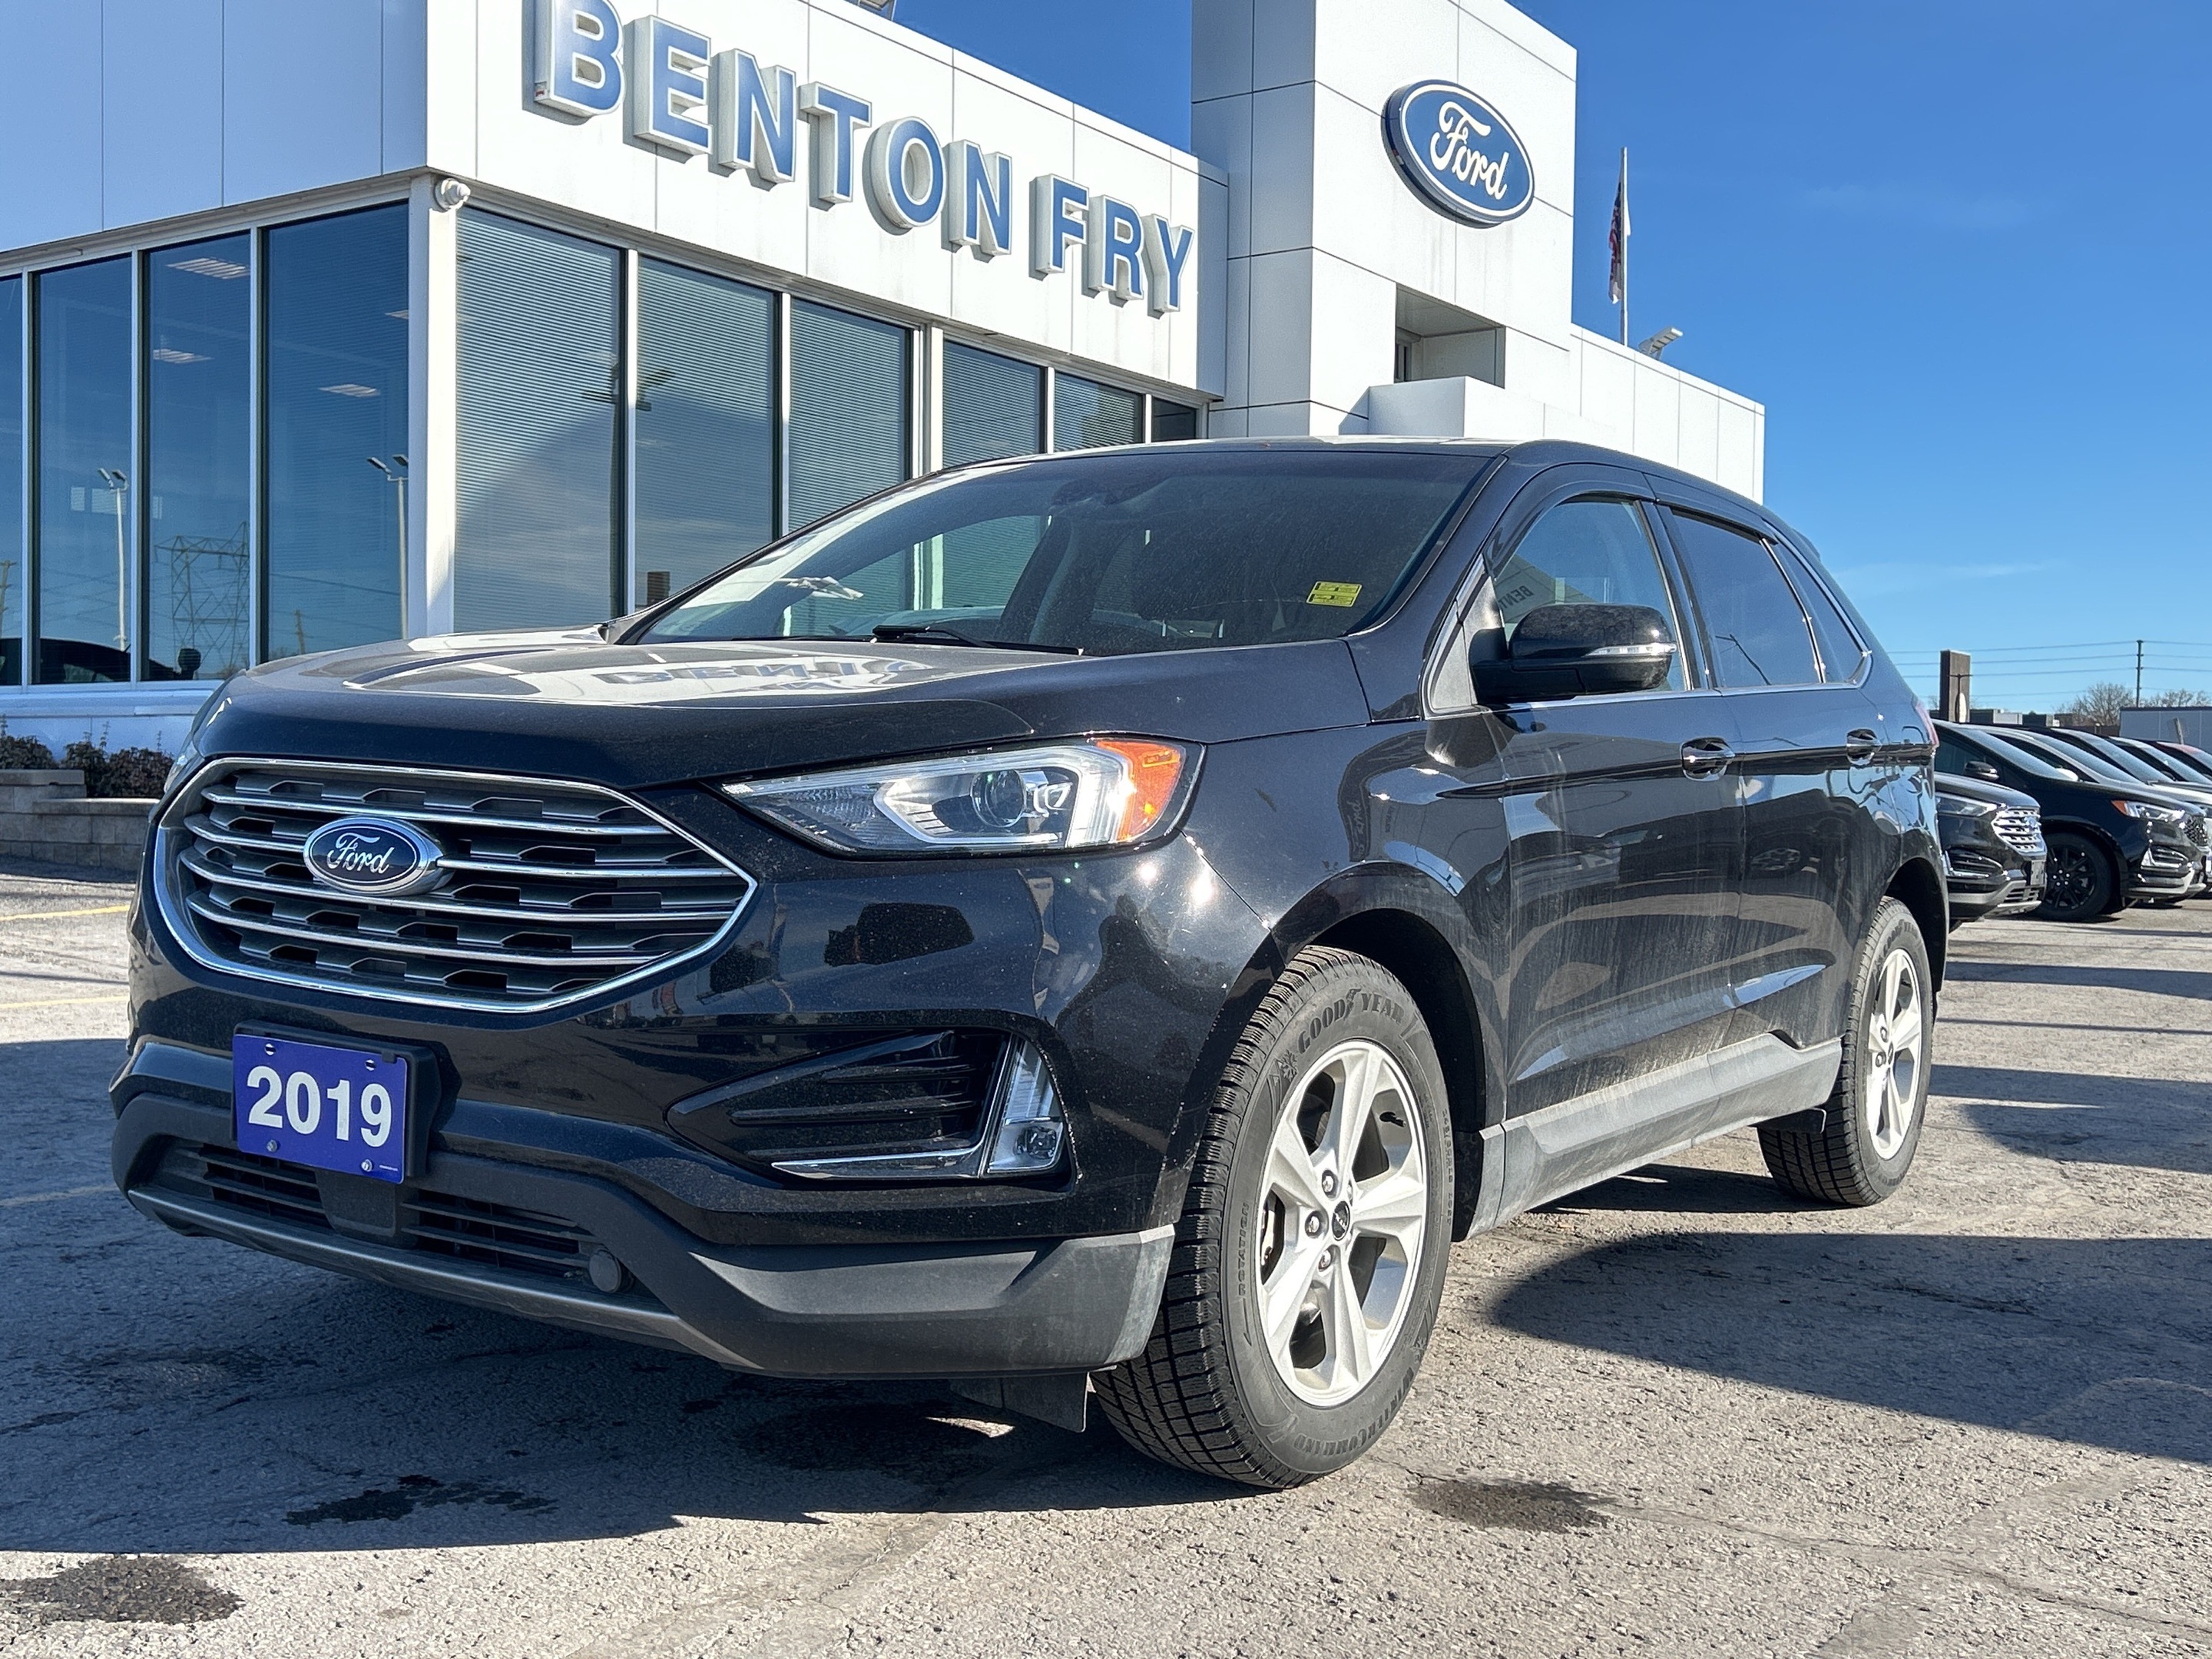 2019 Ford Edge SEL - 2.0L Navigation, sunroof, touch screen co-pi